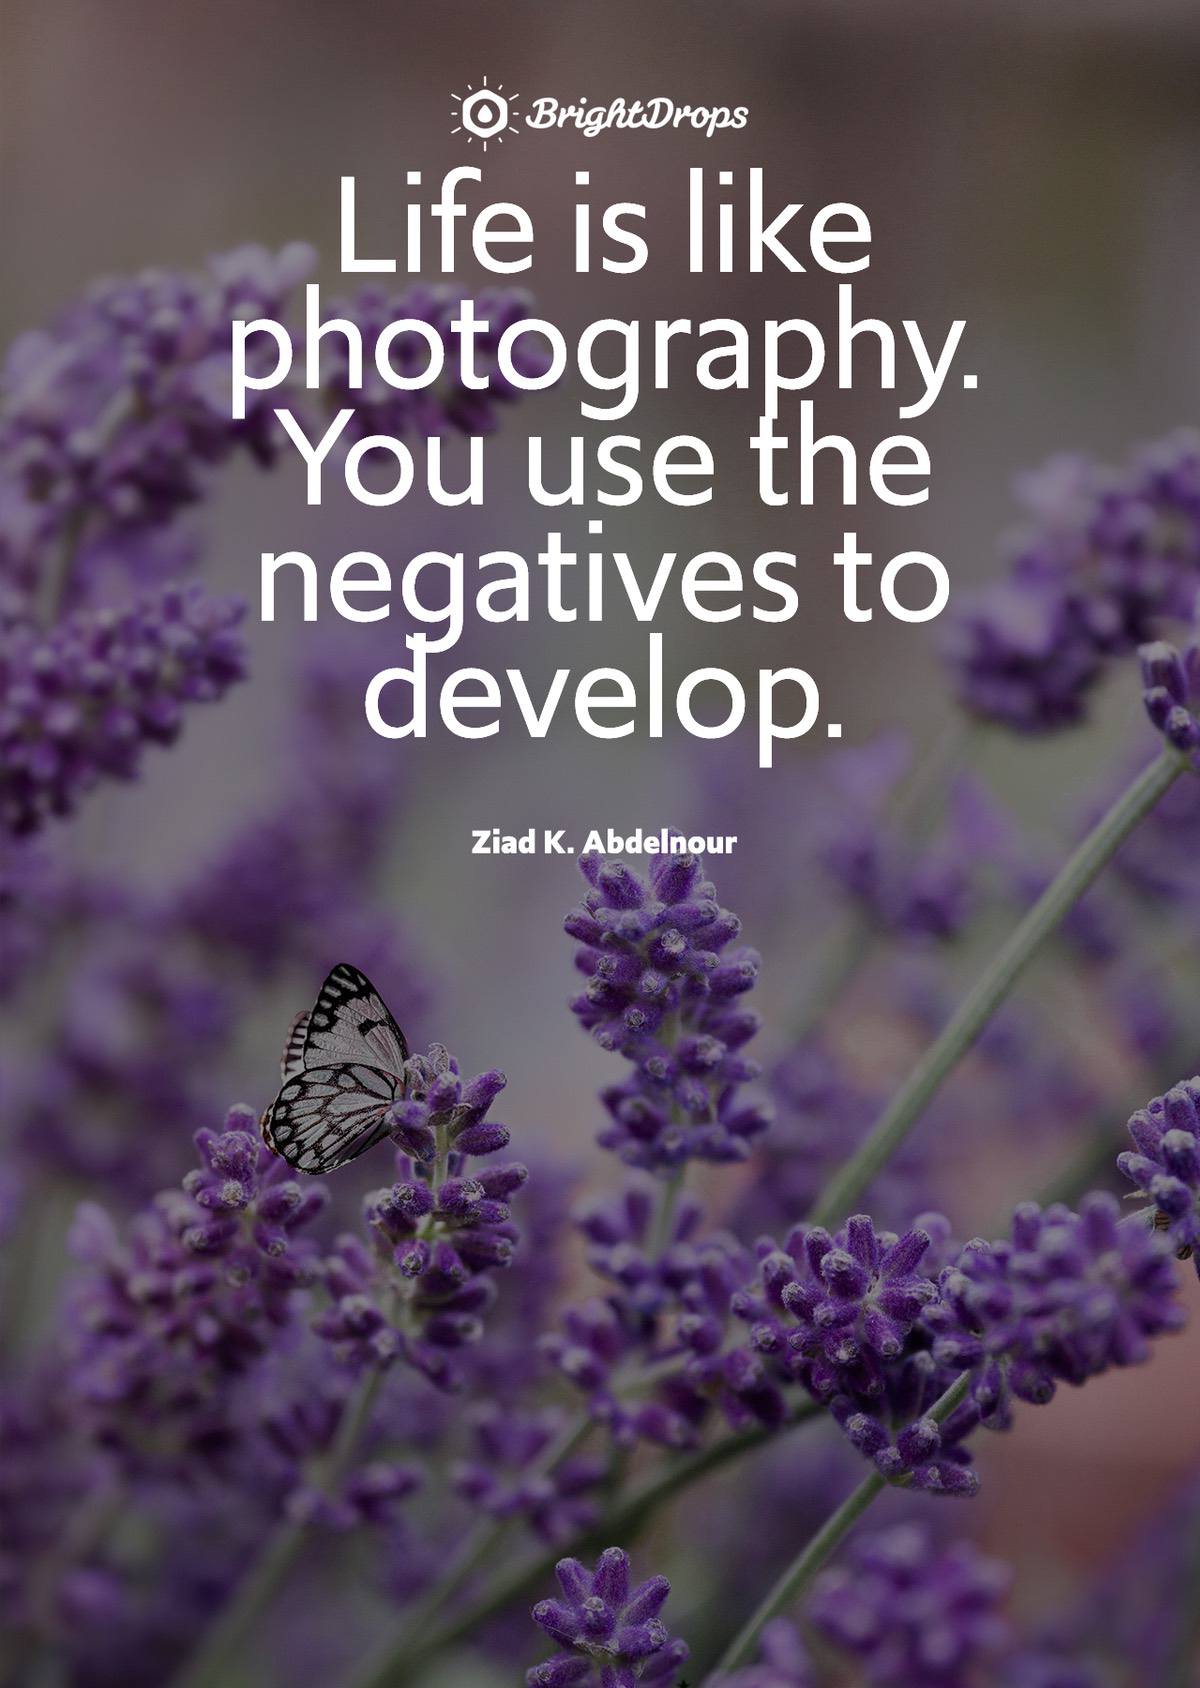 Life is like photography. You use the negatives to develop. - Ziad K. Abdelnour